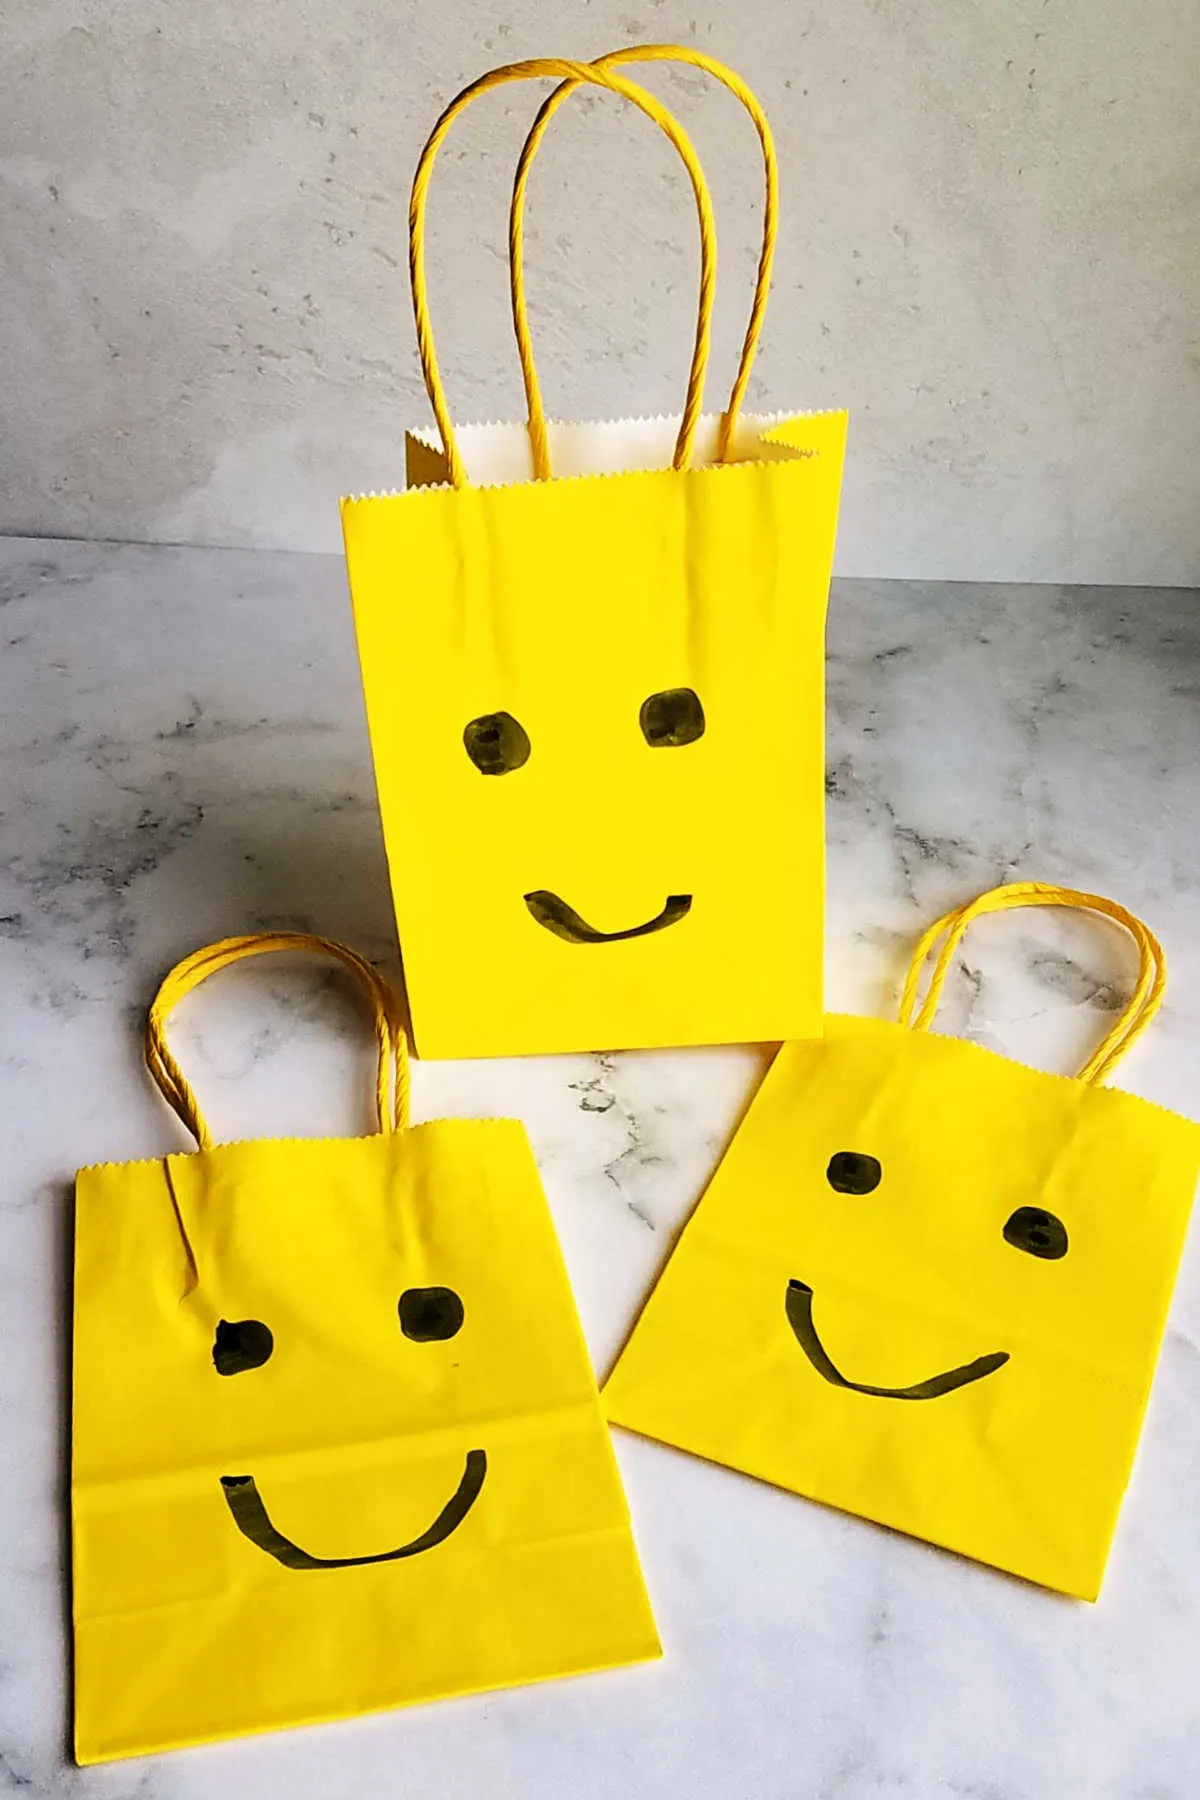 yellow treat bags with faces on them to look like lego heads.